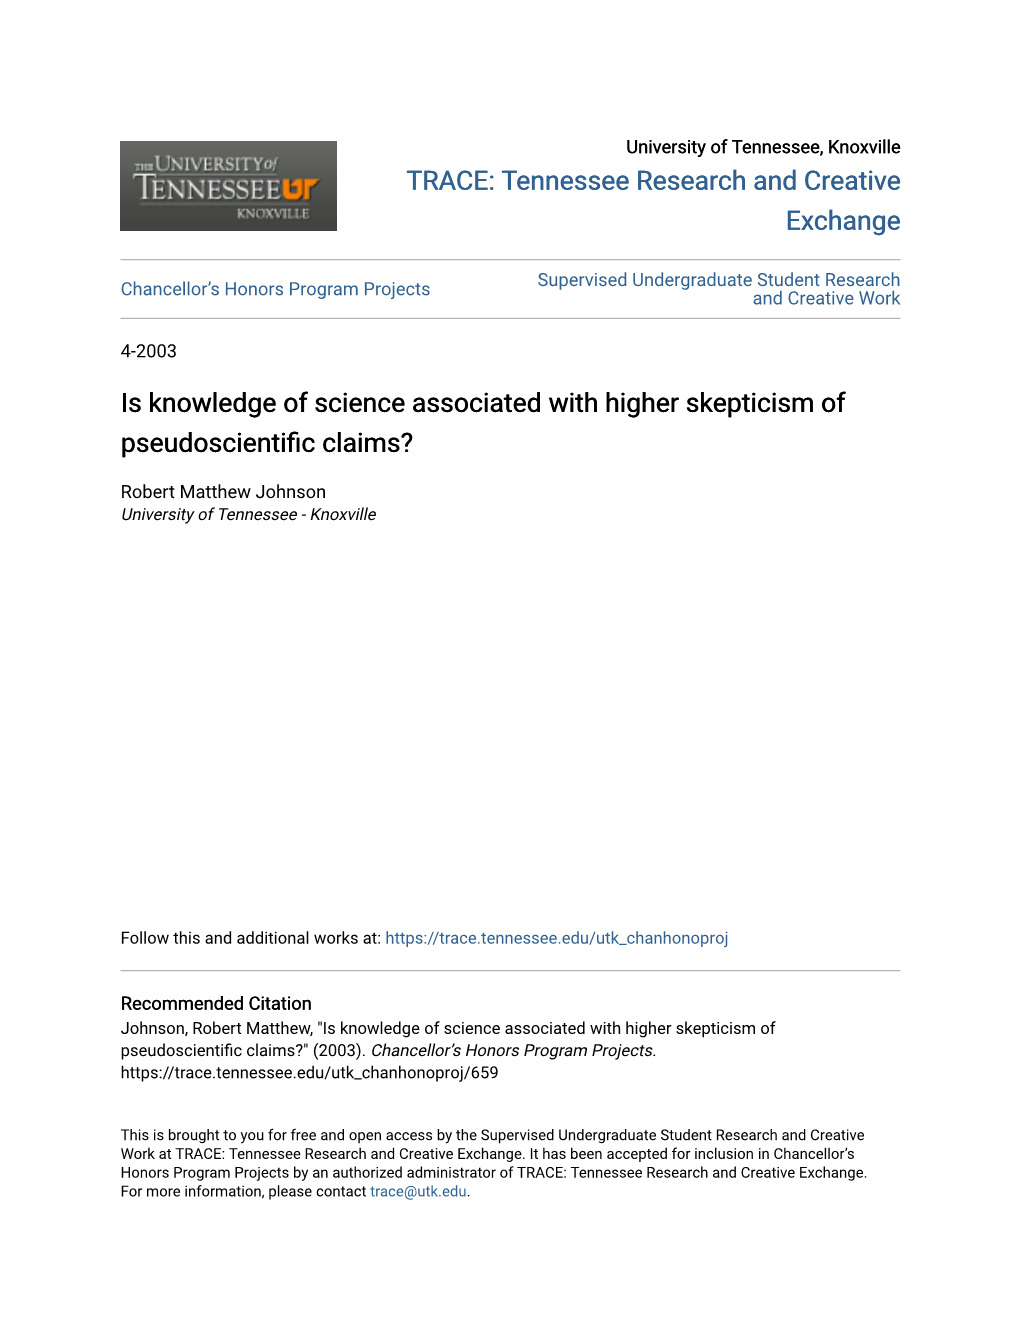 Is Knowledge of Science Associated with Higher Skepticism of Pseudoscientific Claims?